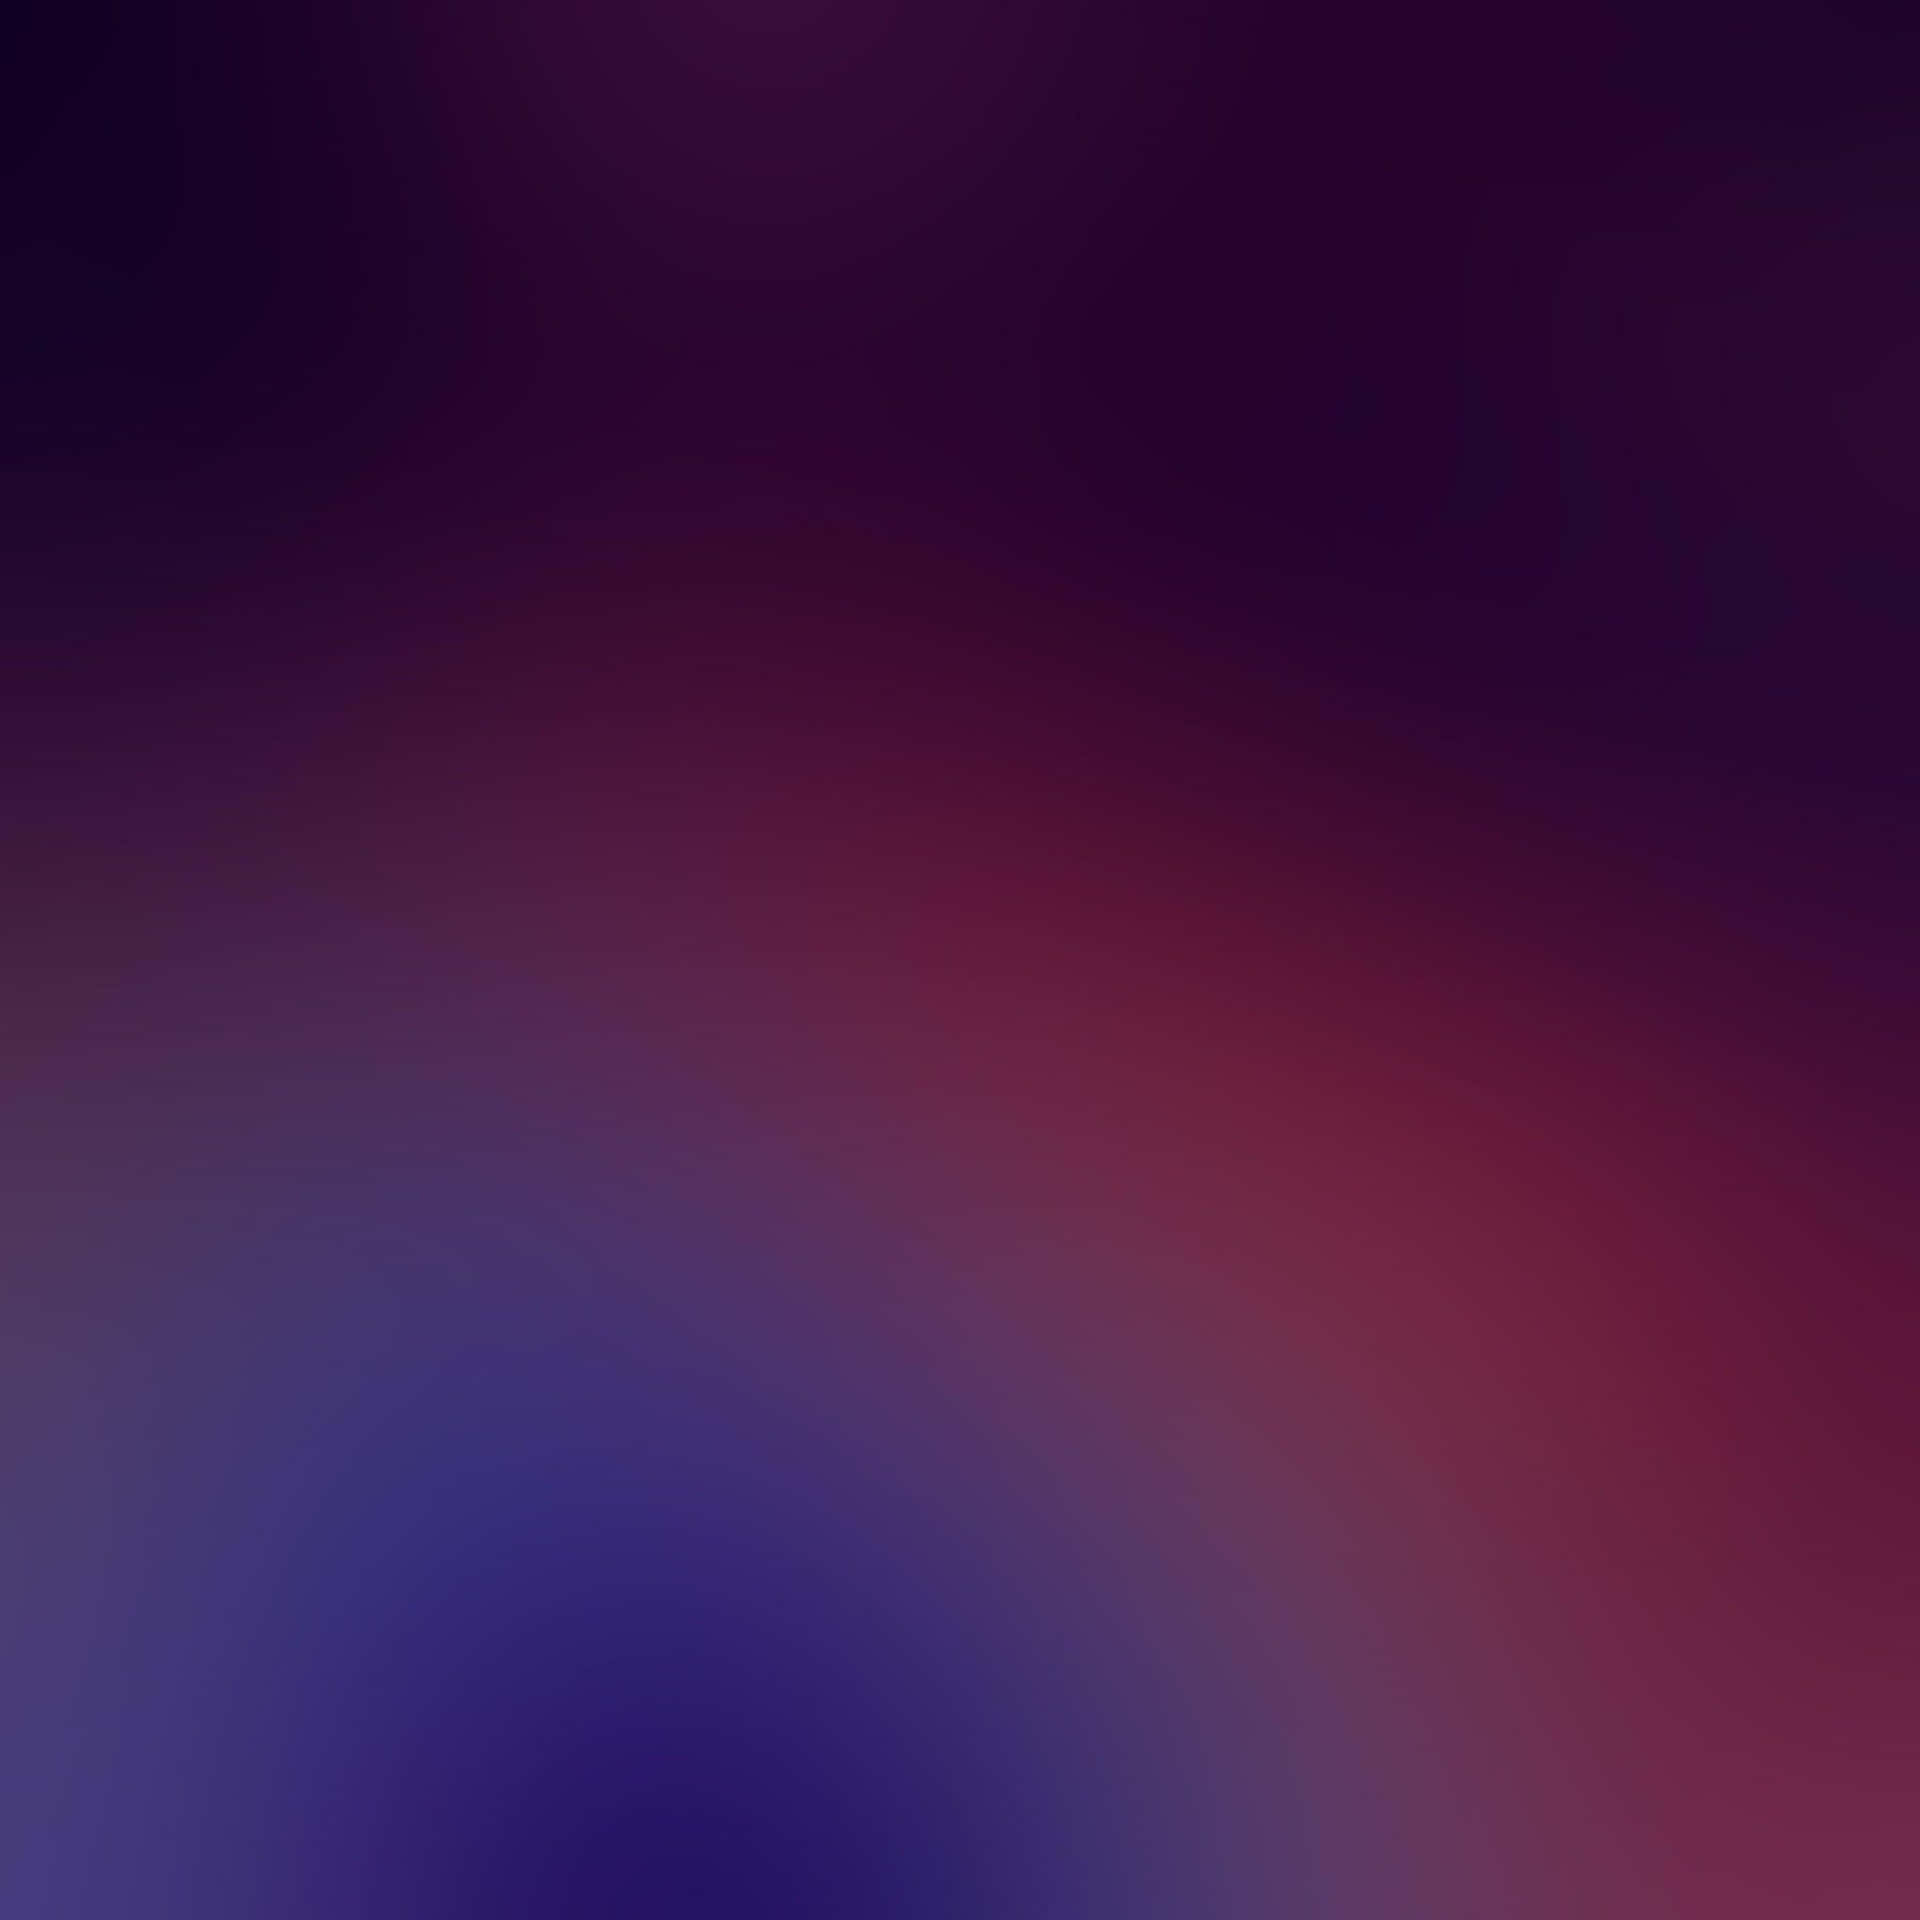 A Purple And Blue Background With A Swirl